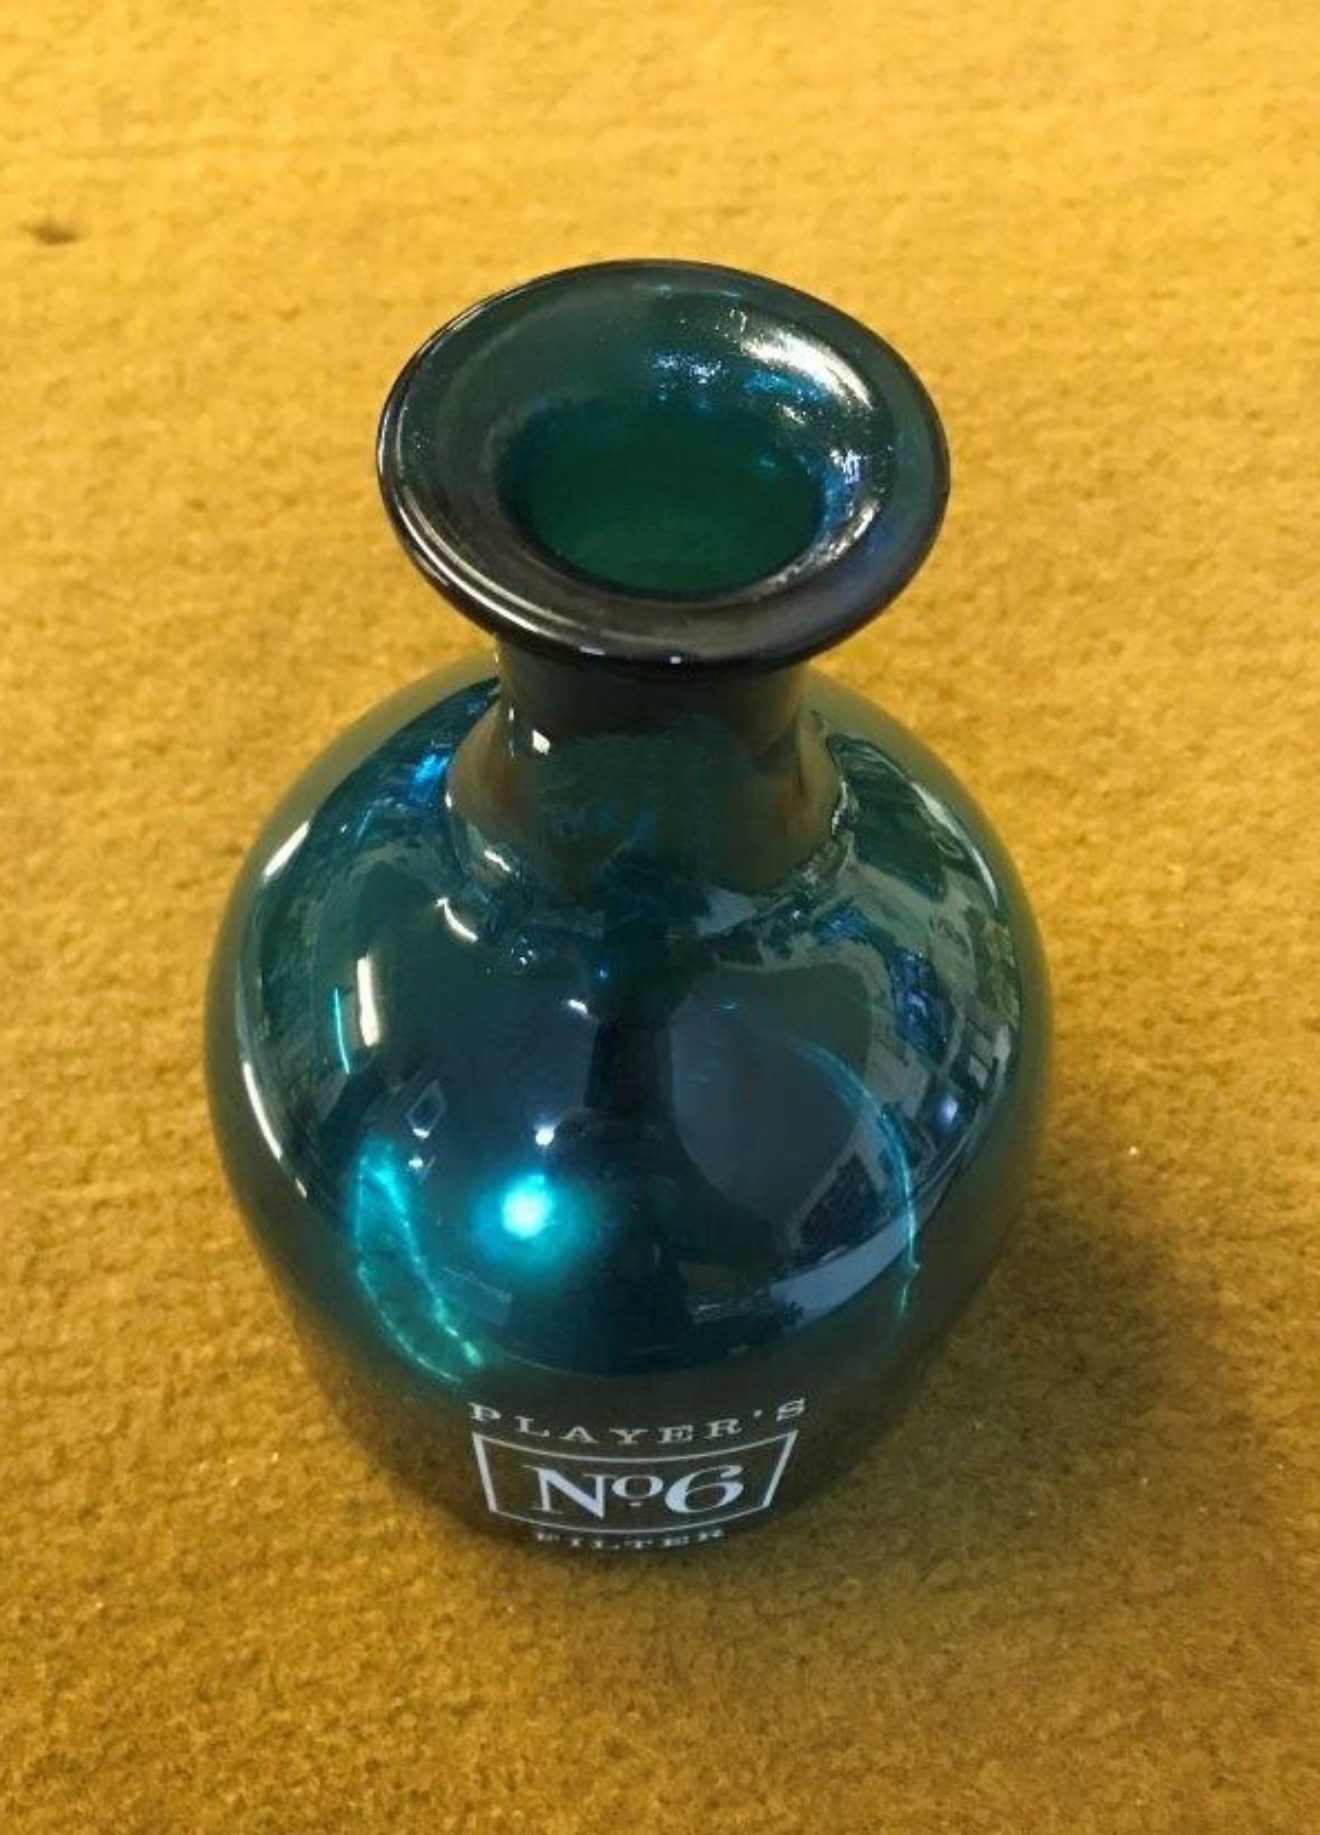 Vintage Players No6 Cigarettes Decanter Green Glass